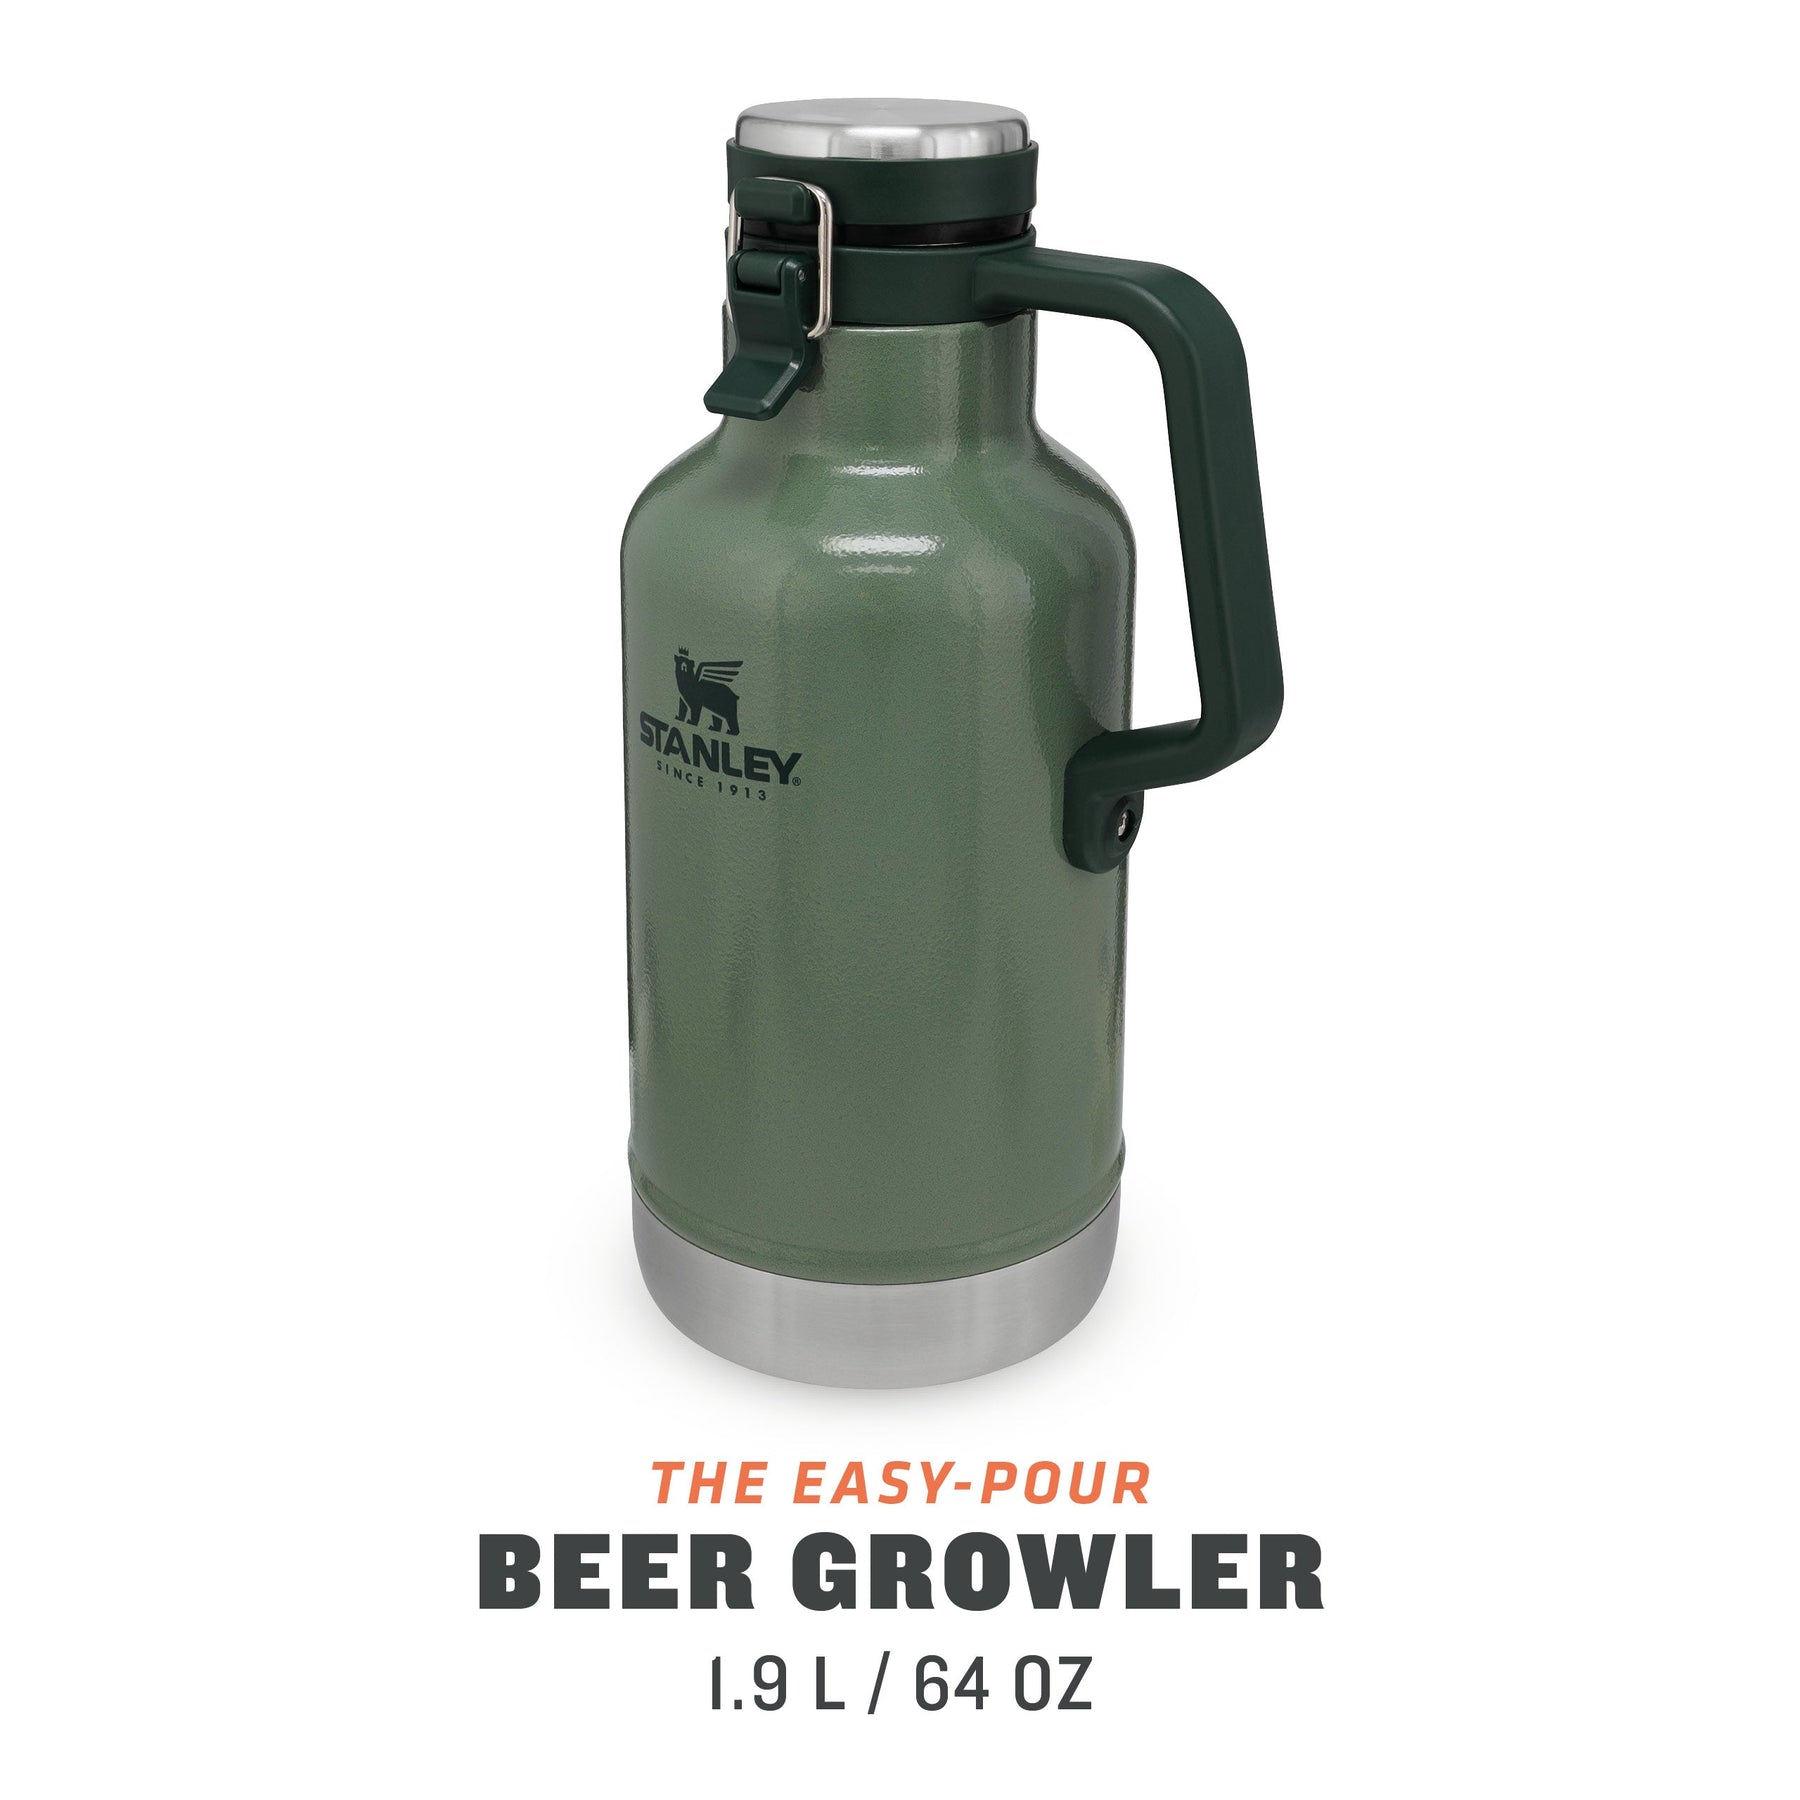 https://cdn.shopify.com/s/files/1/0516/4564/5000/products/Stanley-TheEasy-PourBeerGrowler1.9L_64OZ-HammertoneGreen-2_1800x1800.jpg?v=1699055792